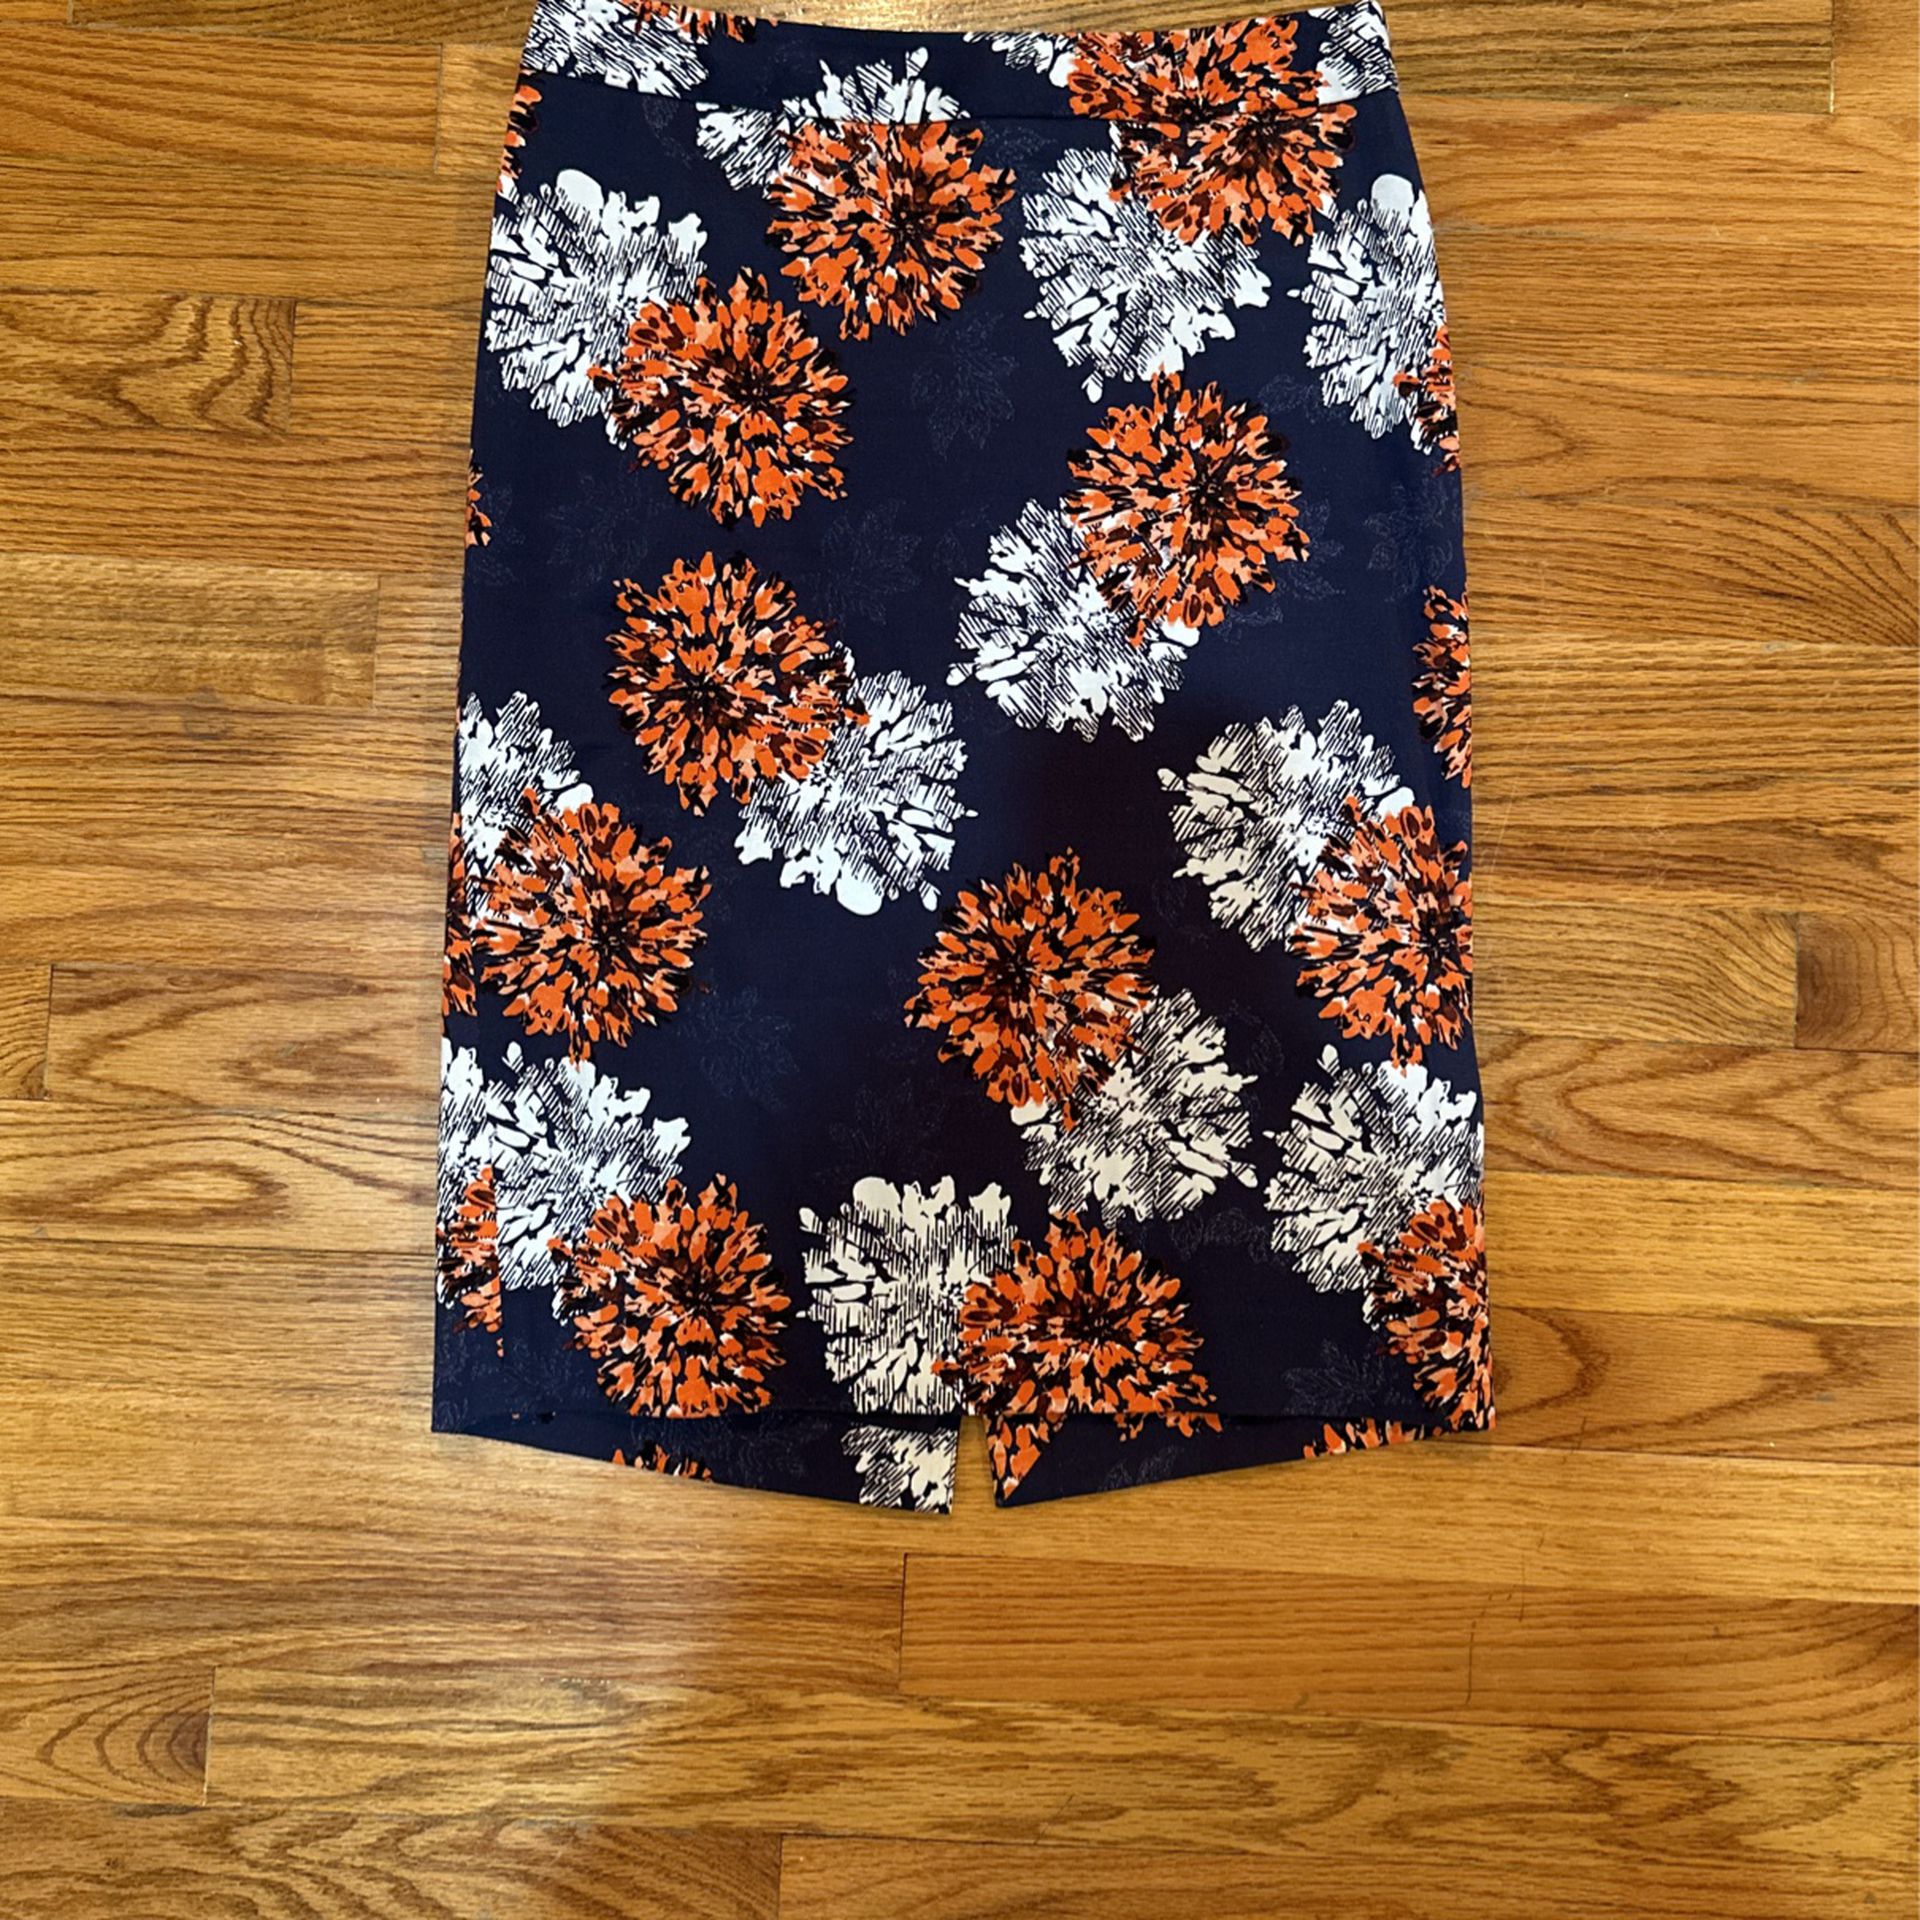 Vintage Pencil Skirt by The Limited